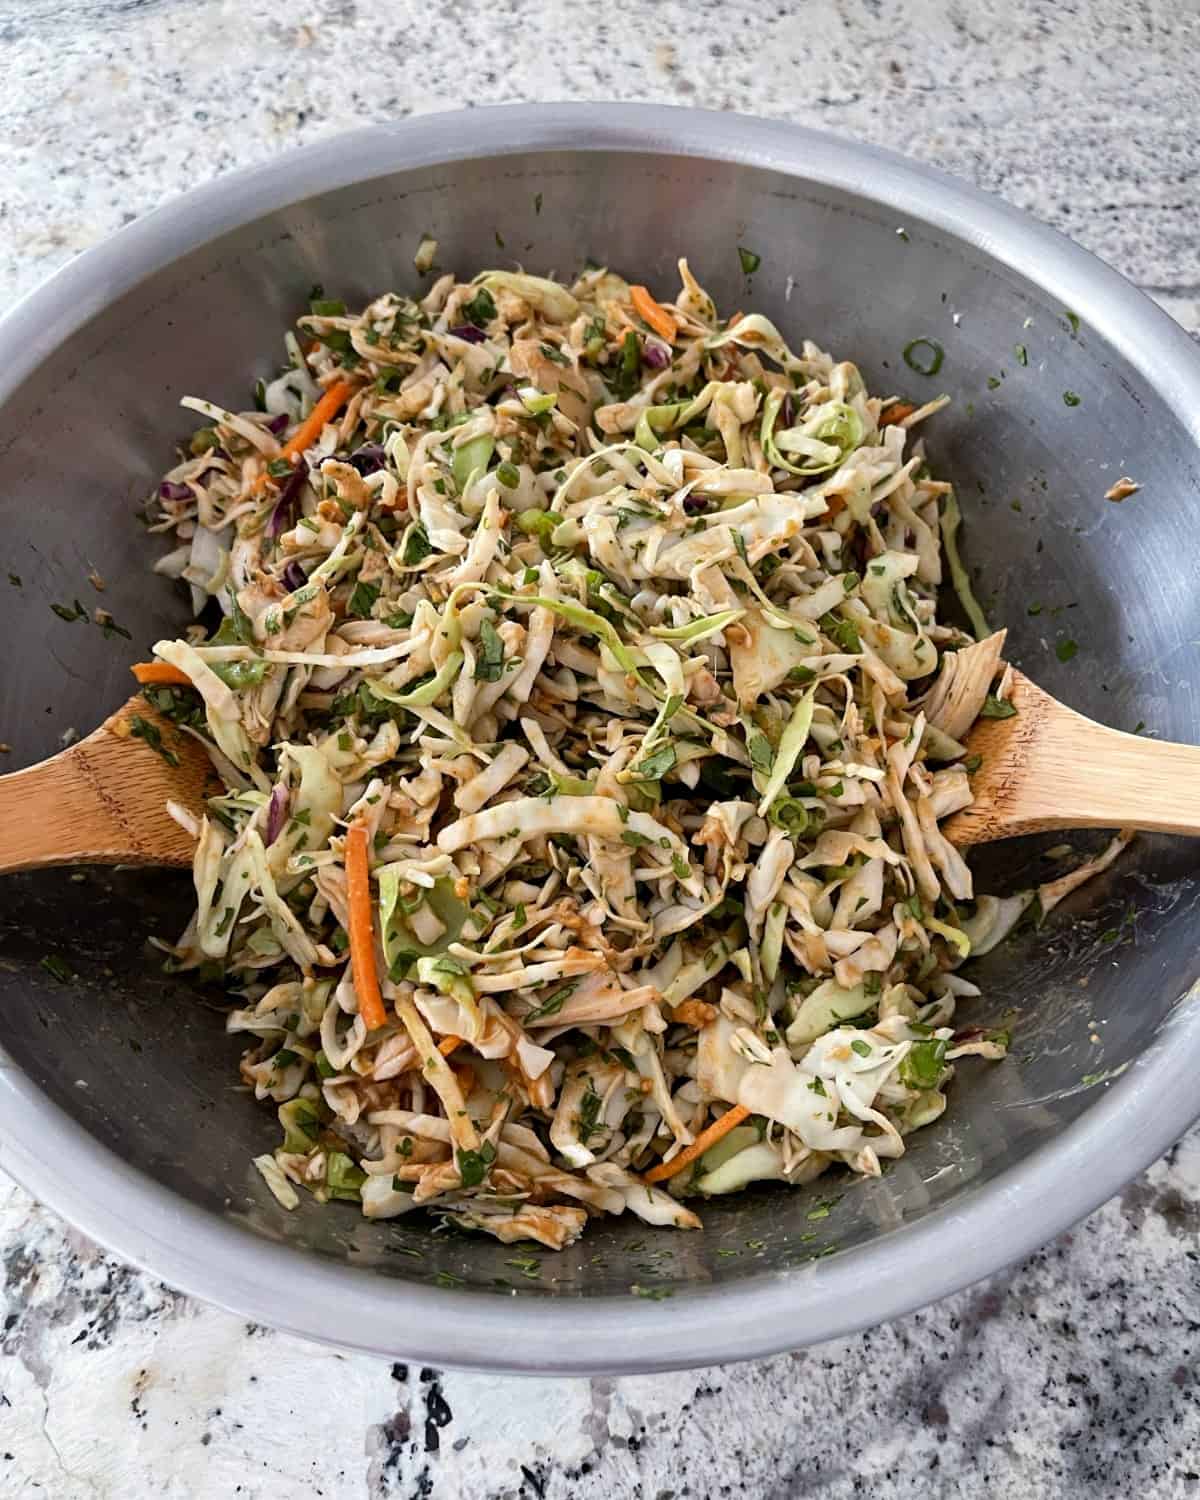 Tossing Thai chicken coleslaw in large bowl with two wooden spoons.